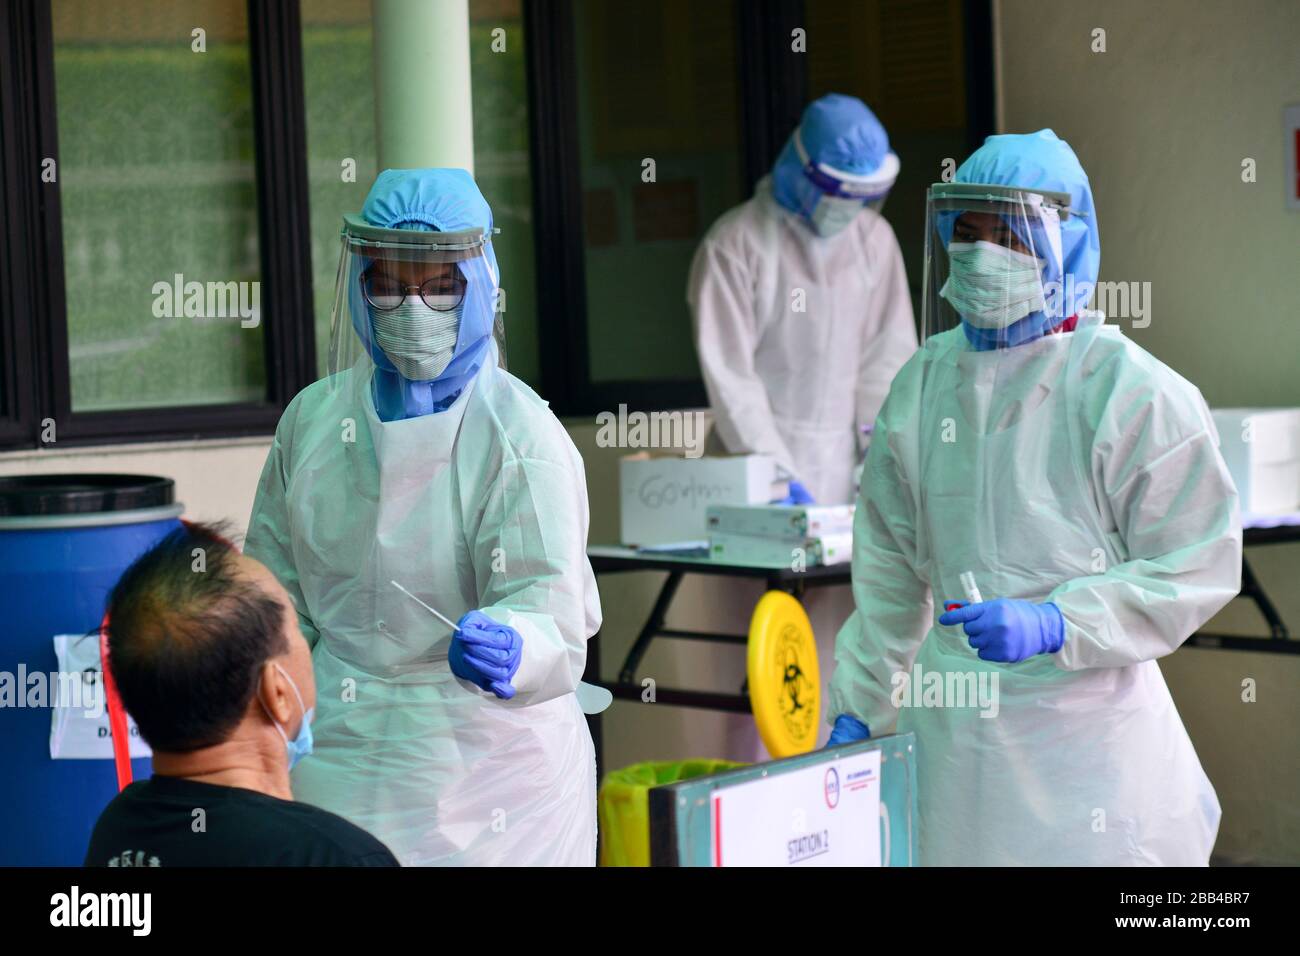 Kuala Lumpur, Malaysia. 30th Mar, 2020. A medical staff member takes the sample from a man at a COVID-19 testing area of a hospital in Damansara near Kuala Lumpur, Malaysia, March 30, 2020. A total of 37 people have died of the COVID-19 in Malaysia as of Monday with 156 newly confirmed cases, bringing the total to 2,626, said the Health Ministry. Credit: Chong Voon Chung/Xinhua/Alamy Live News Stock Photo